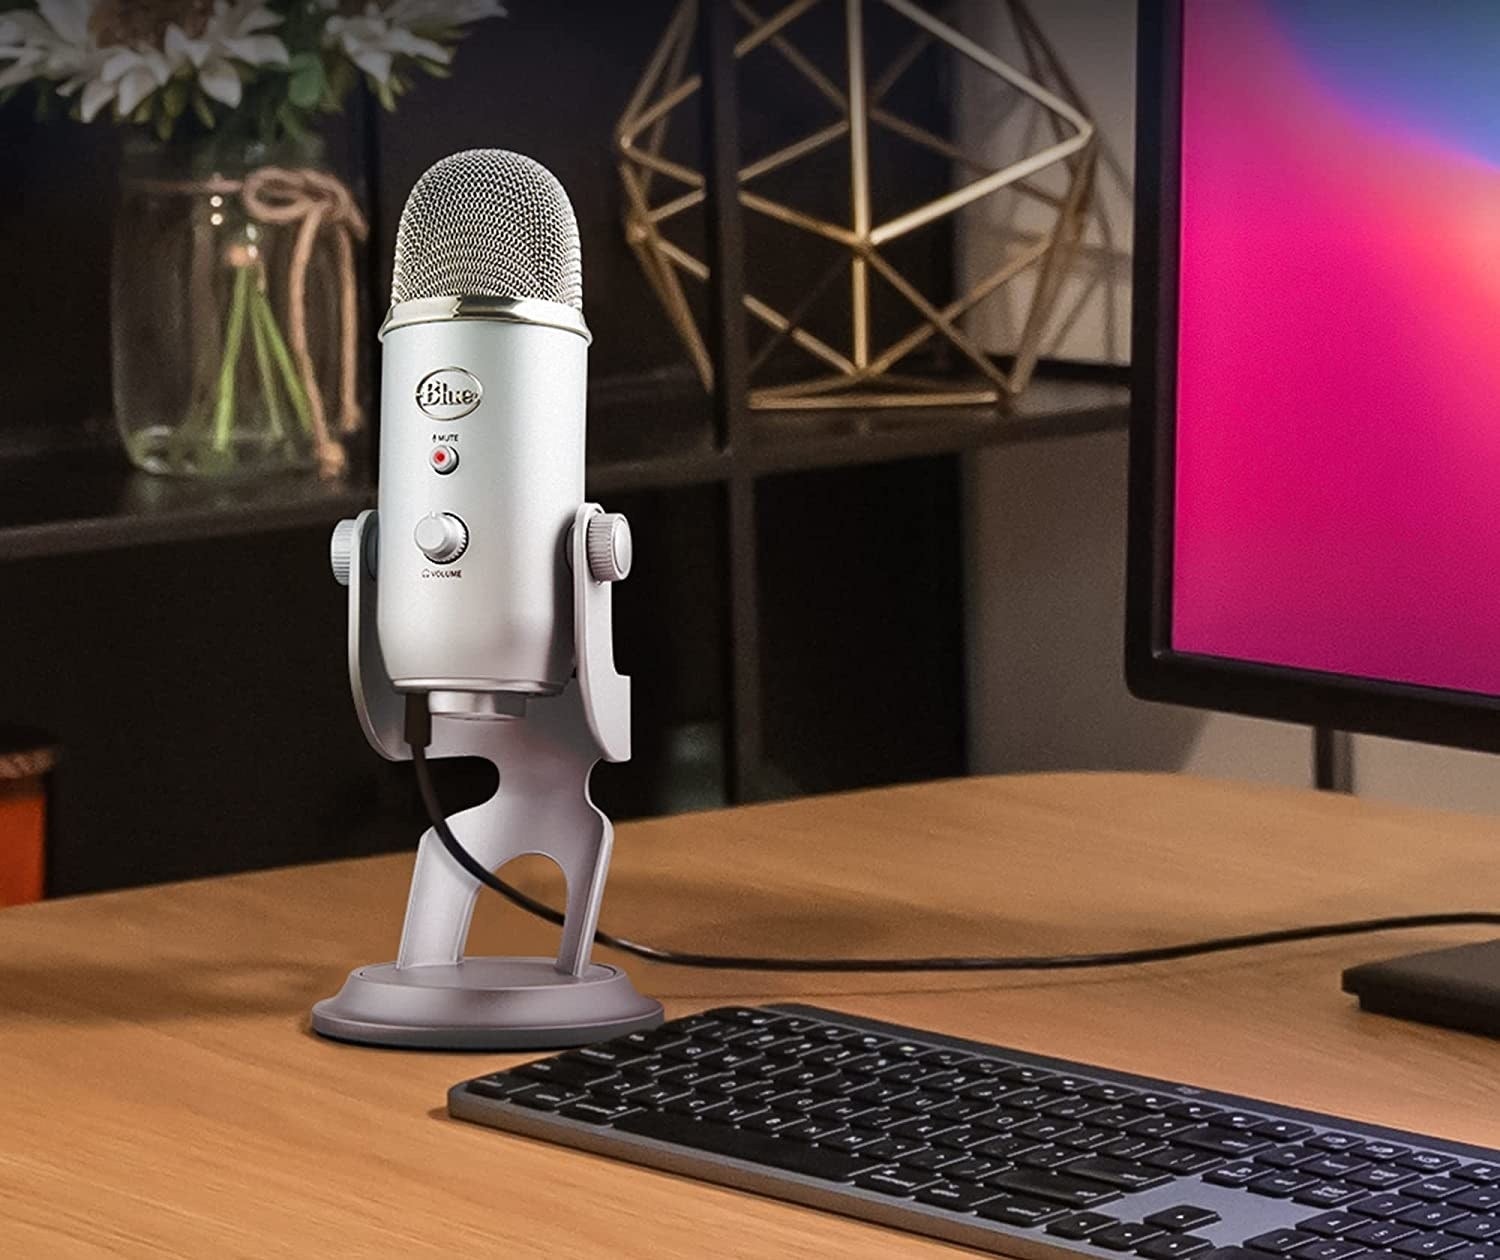 a blue yeti microphone on a desk with a keyboard and computer